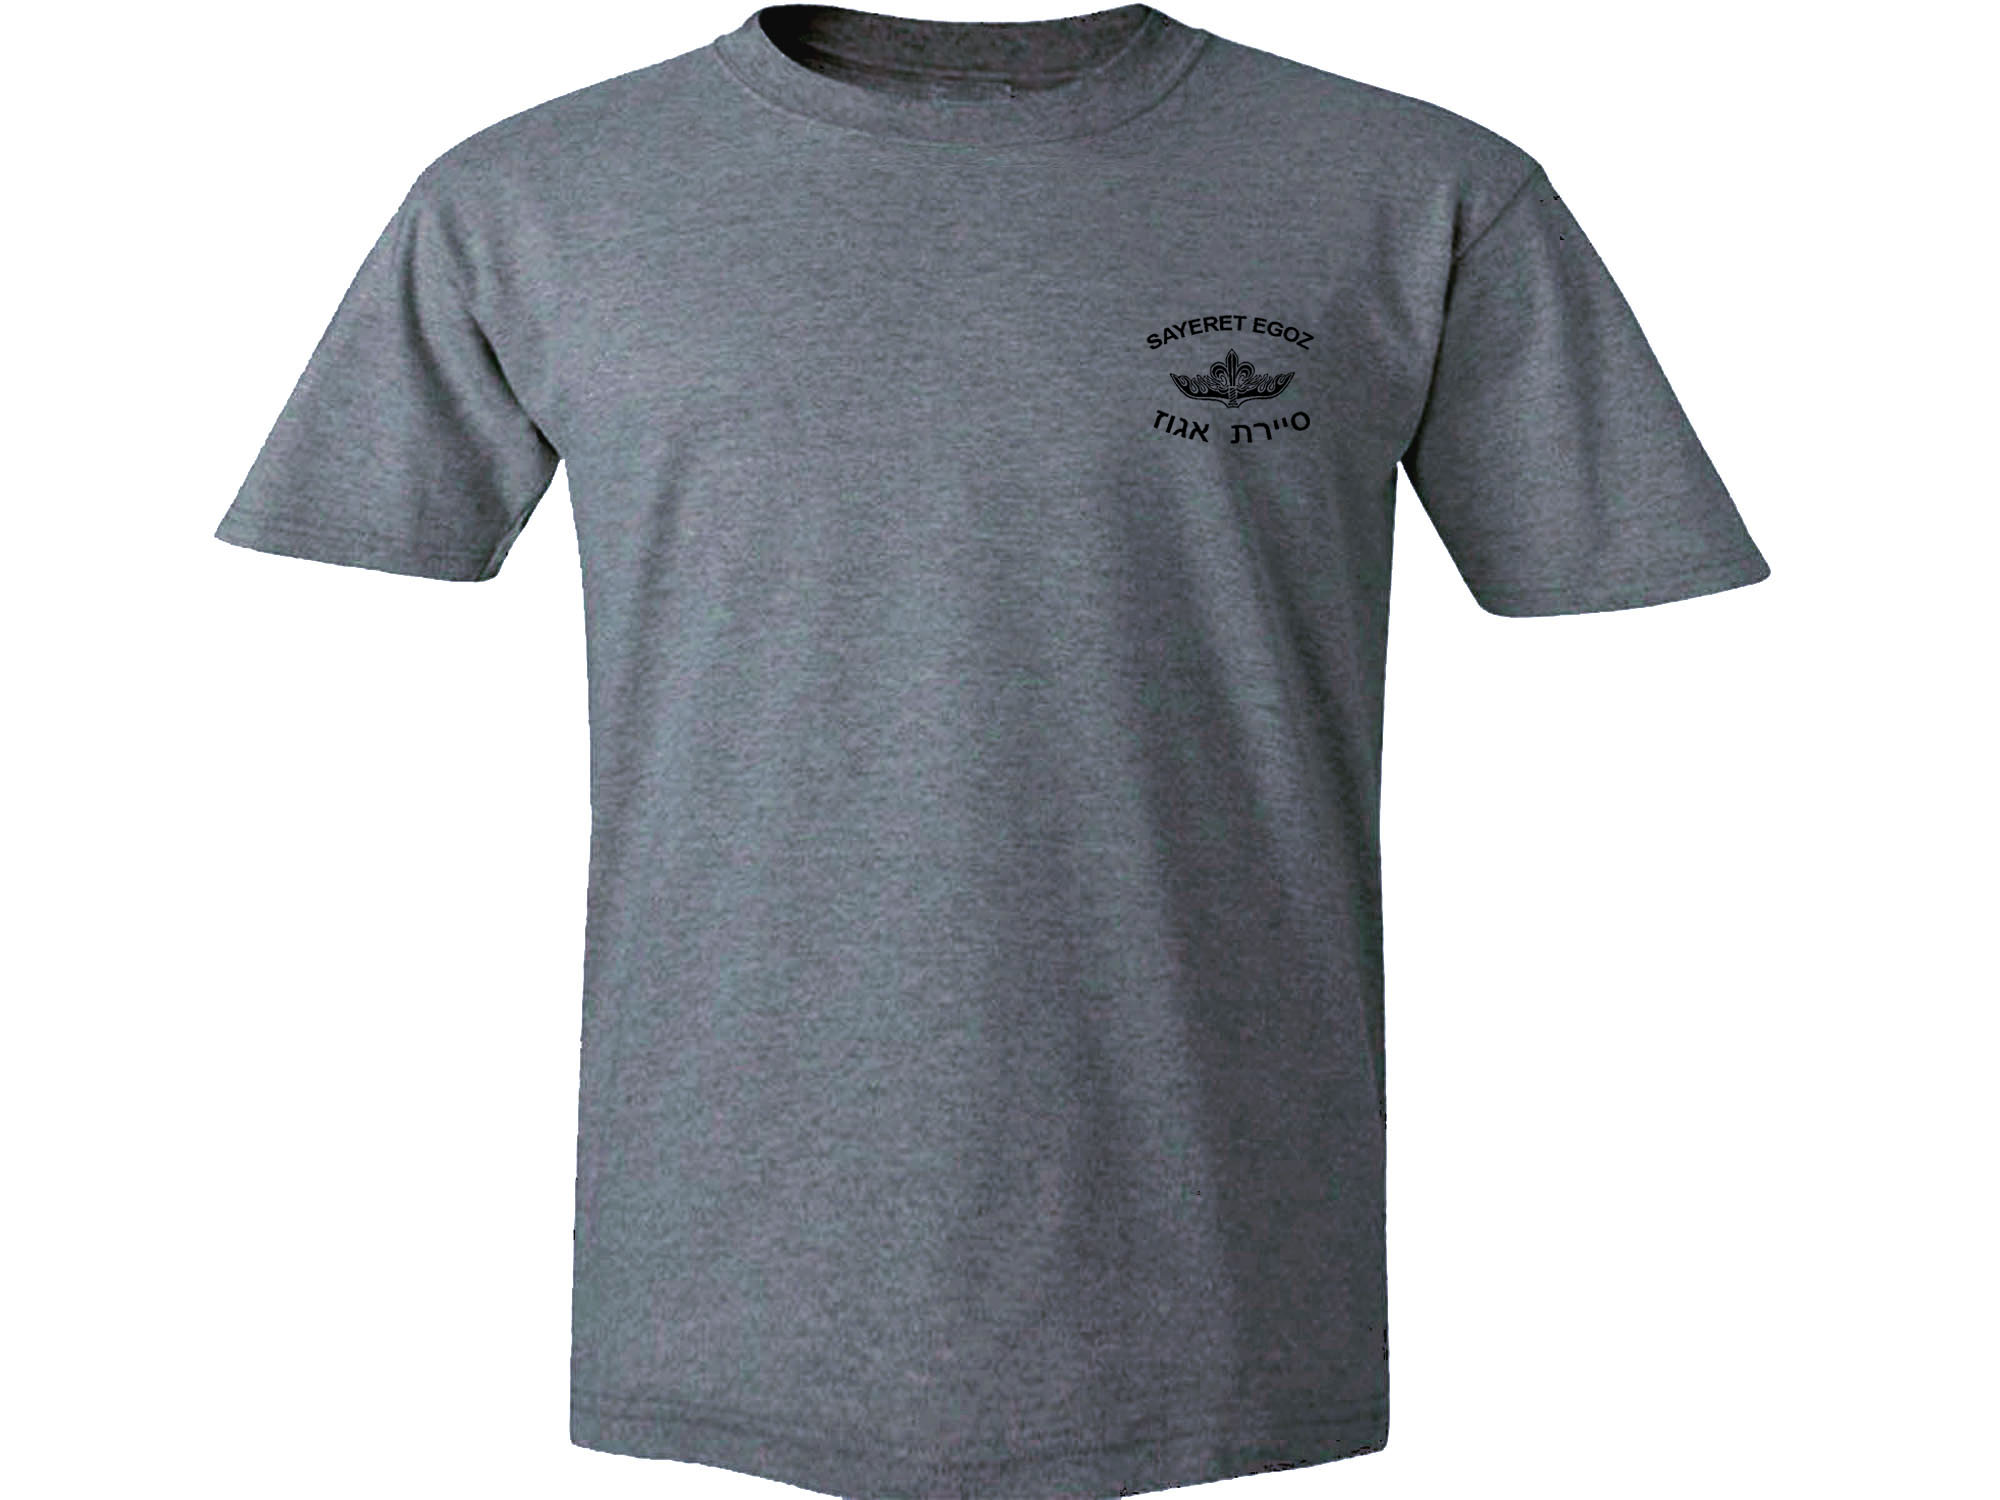 Israel army special forces Sayeret Egoz gray  t-shirt